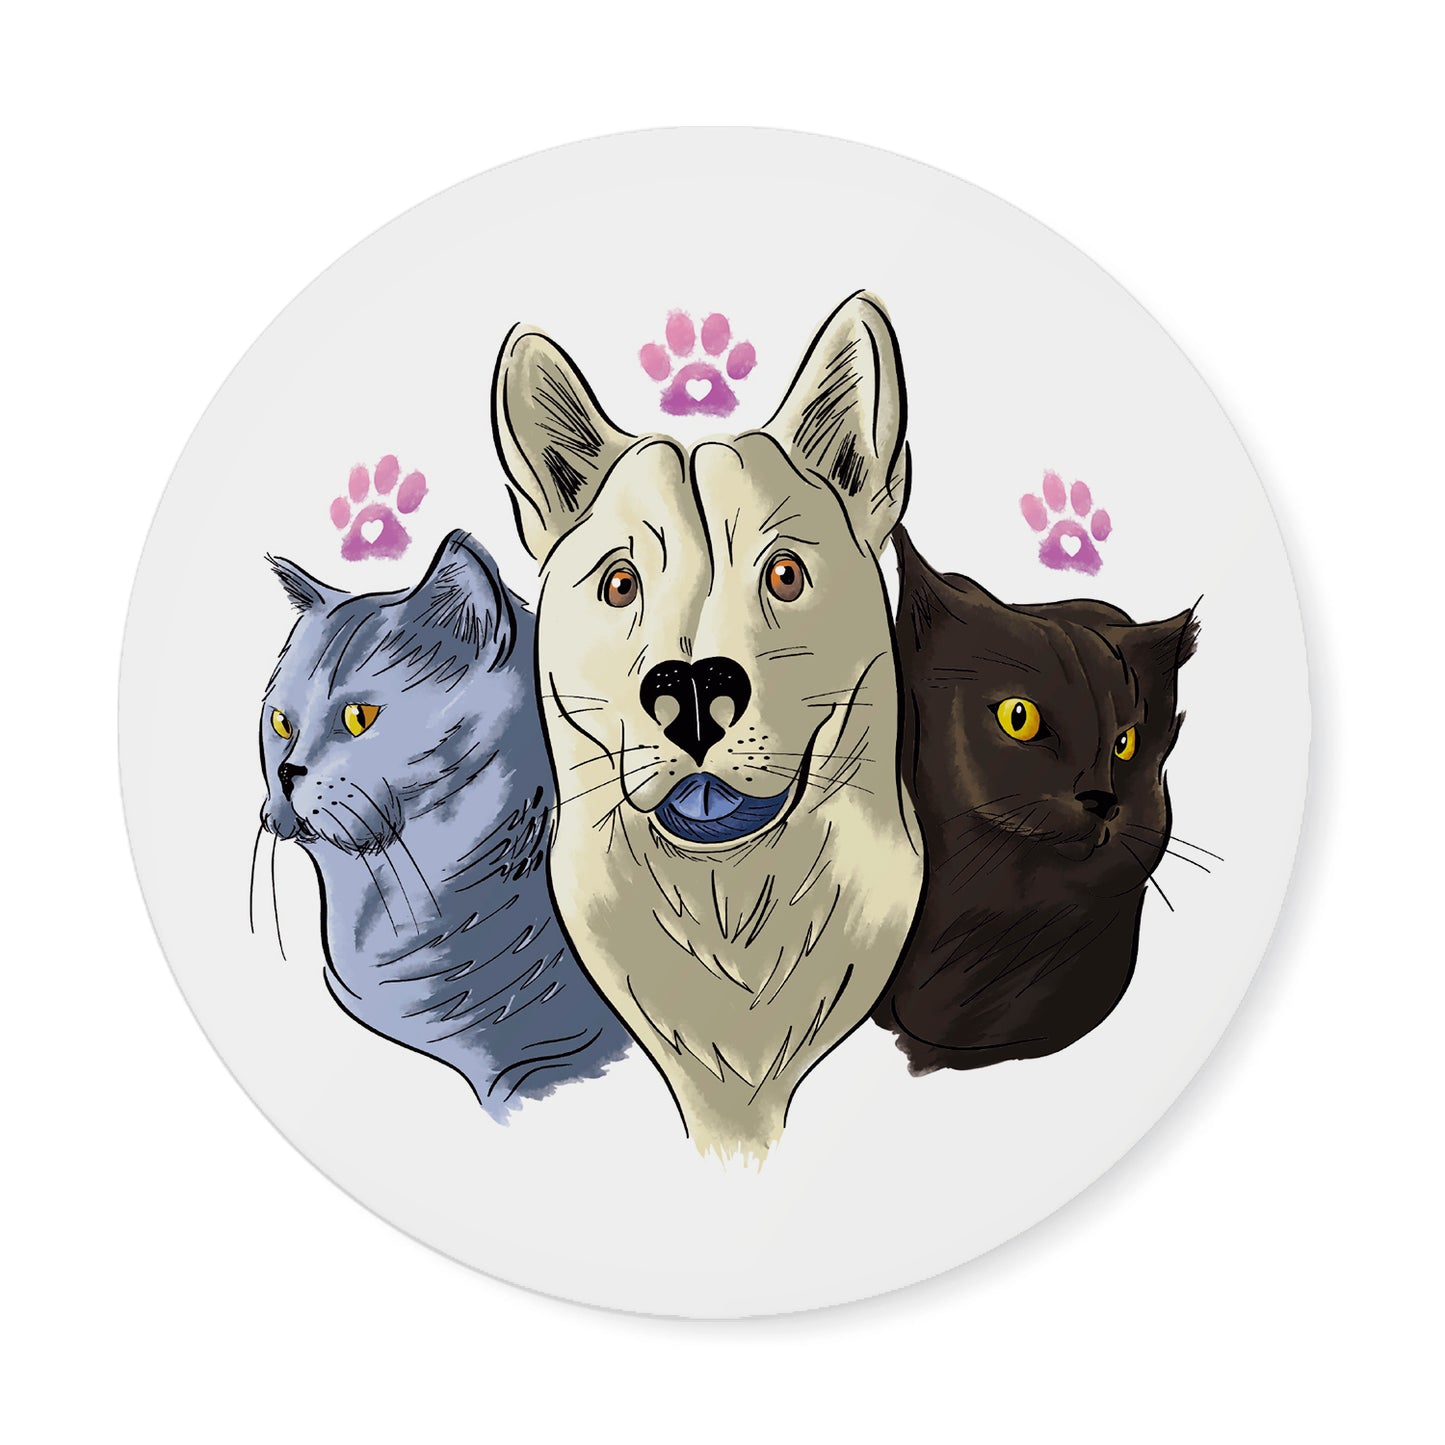 Thumbnail image: calligraphy animal portrait vinyl sticker - PAWesome trio dog and cat